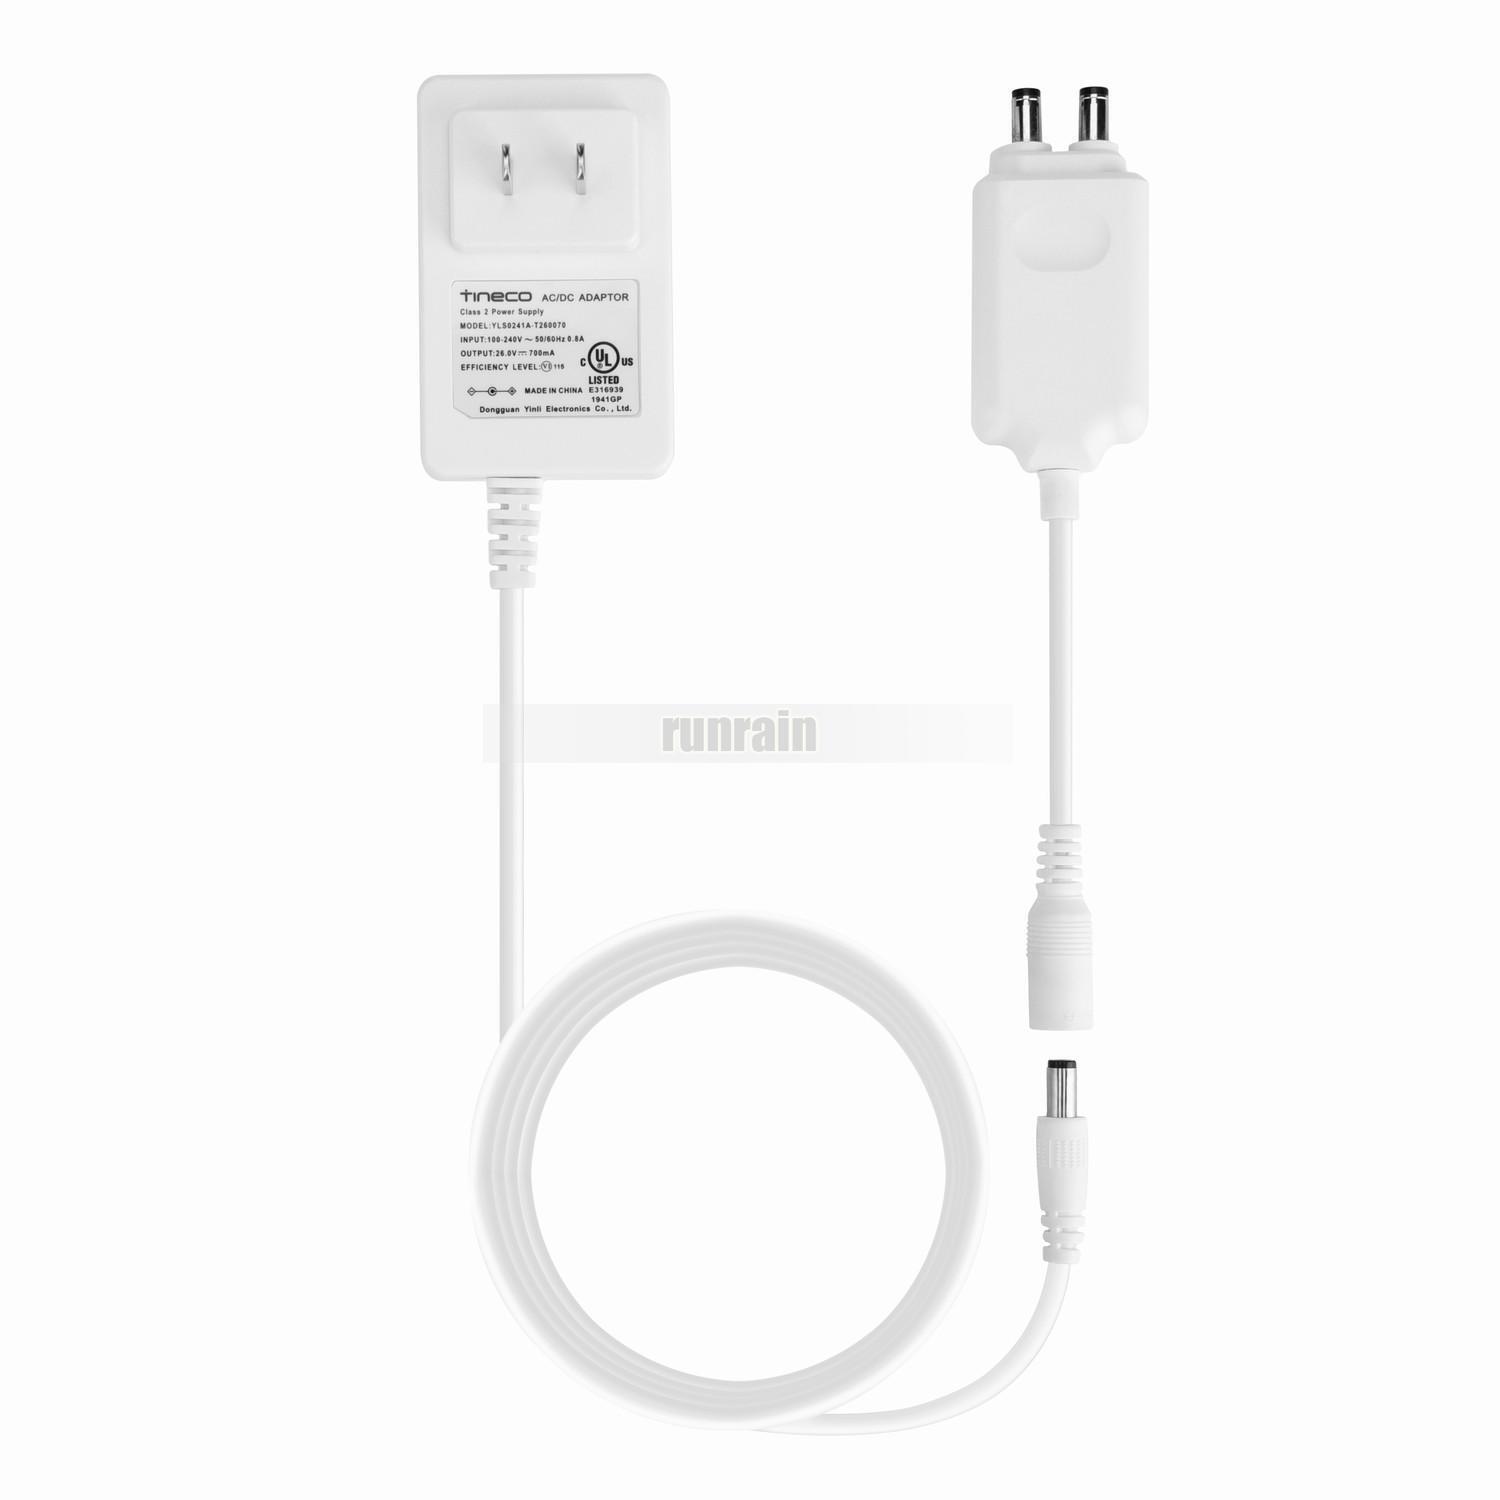 Tineco Pure One S12 S11 A11 Series Dual Charging Adapter 26V 700mA 0.7A Brand: Tineco Color: White Compatible Bran